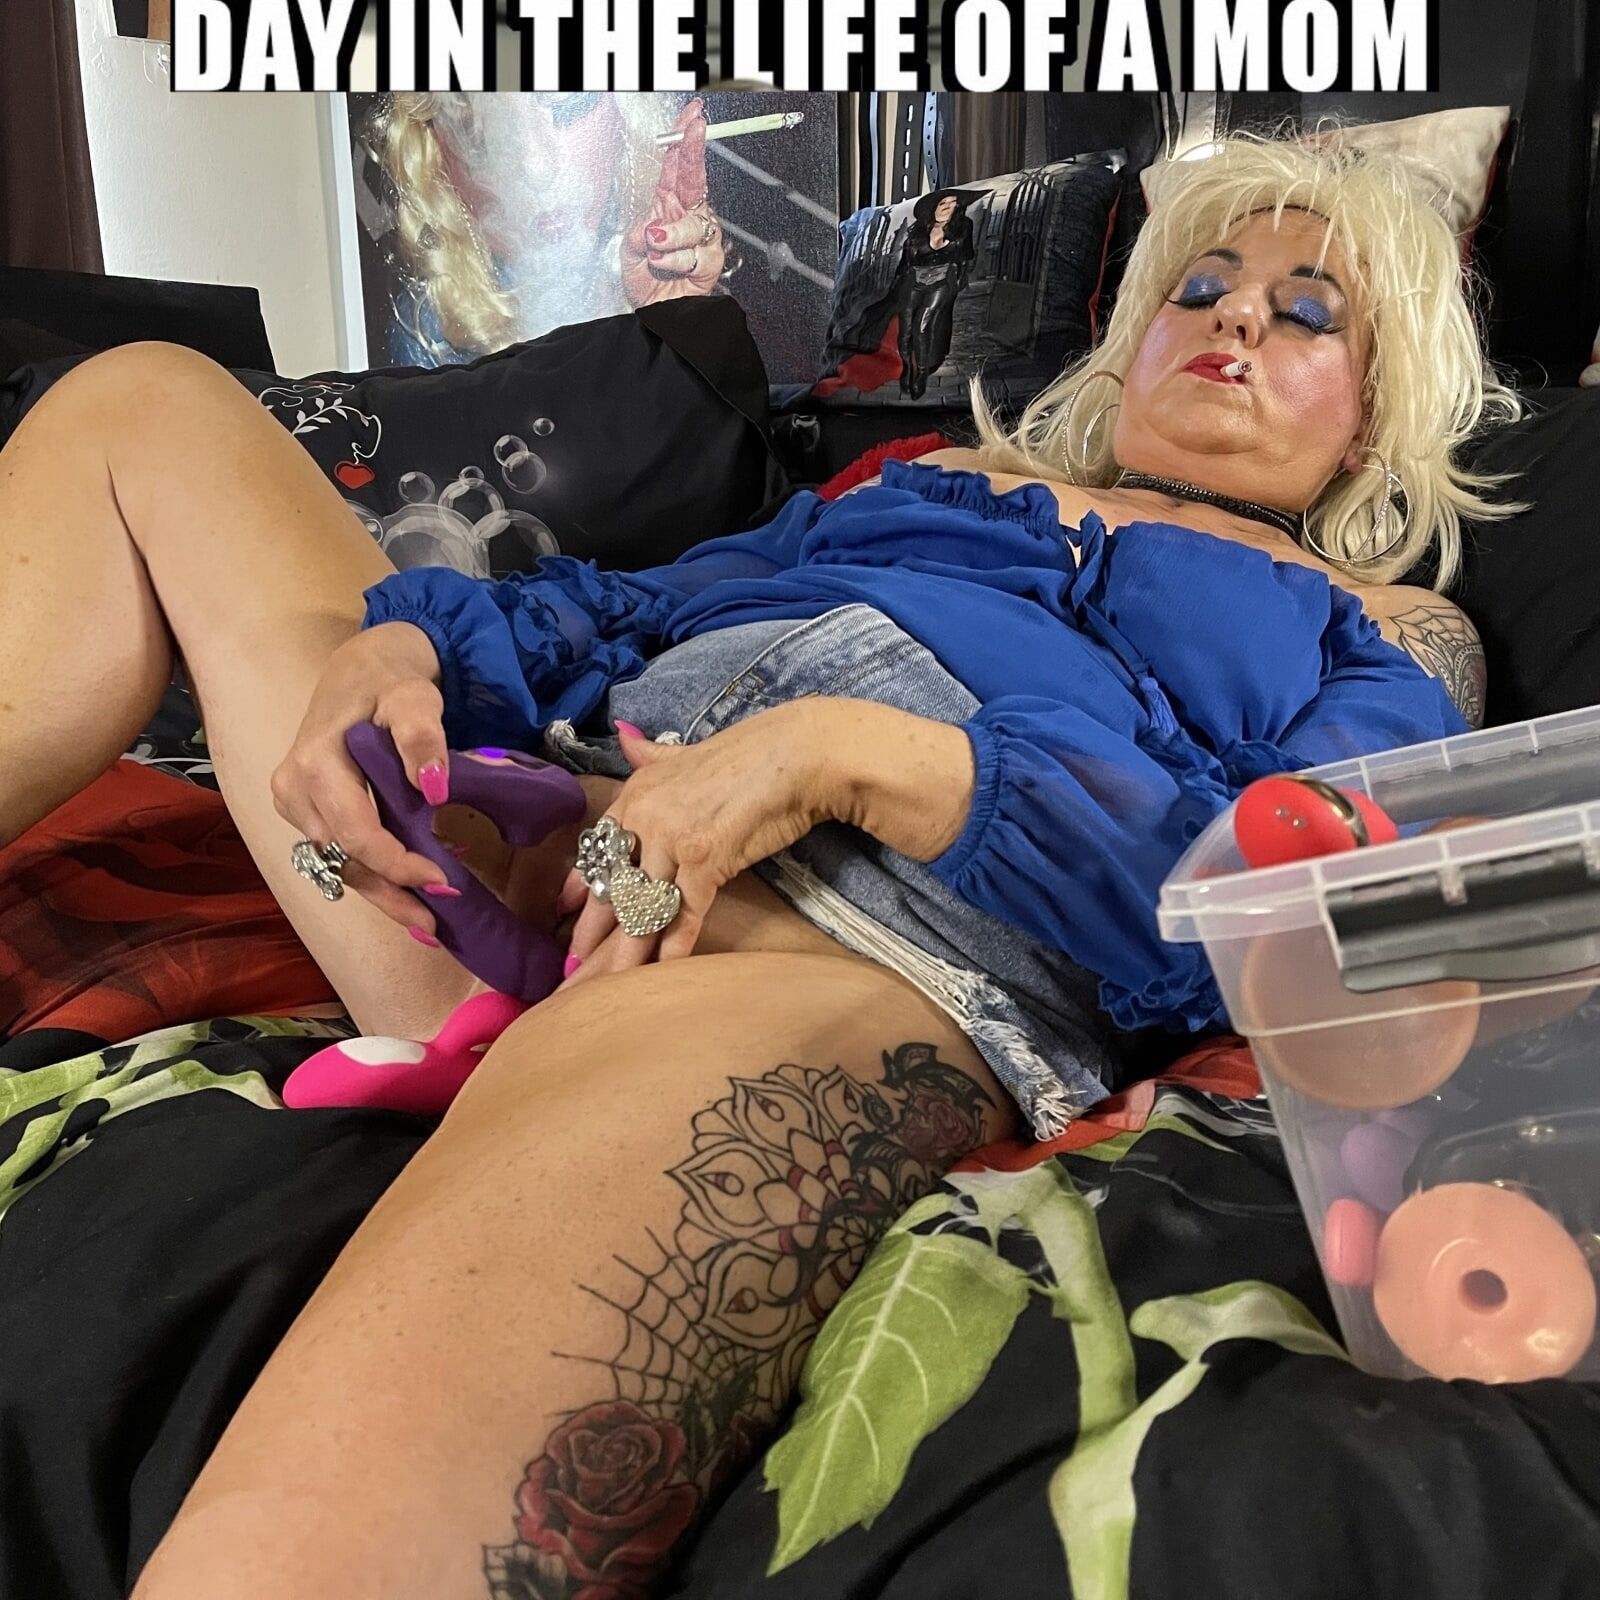 SHIRLEY THE LIFE OF A MOM #13